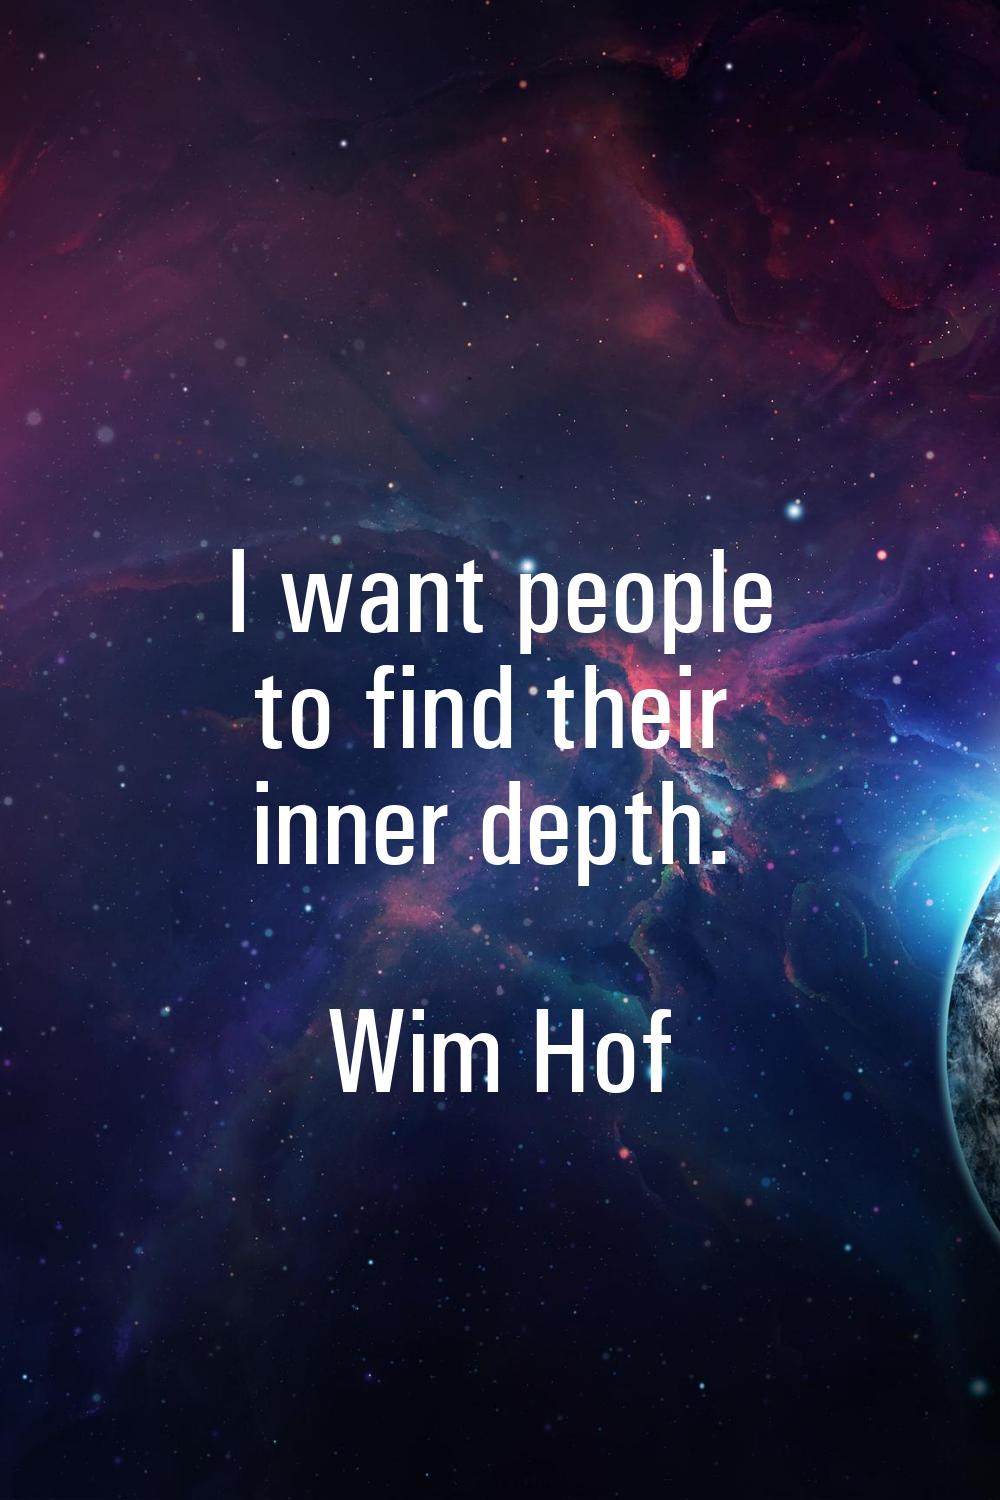 I want people to find their inner depth.